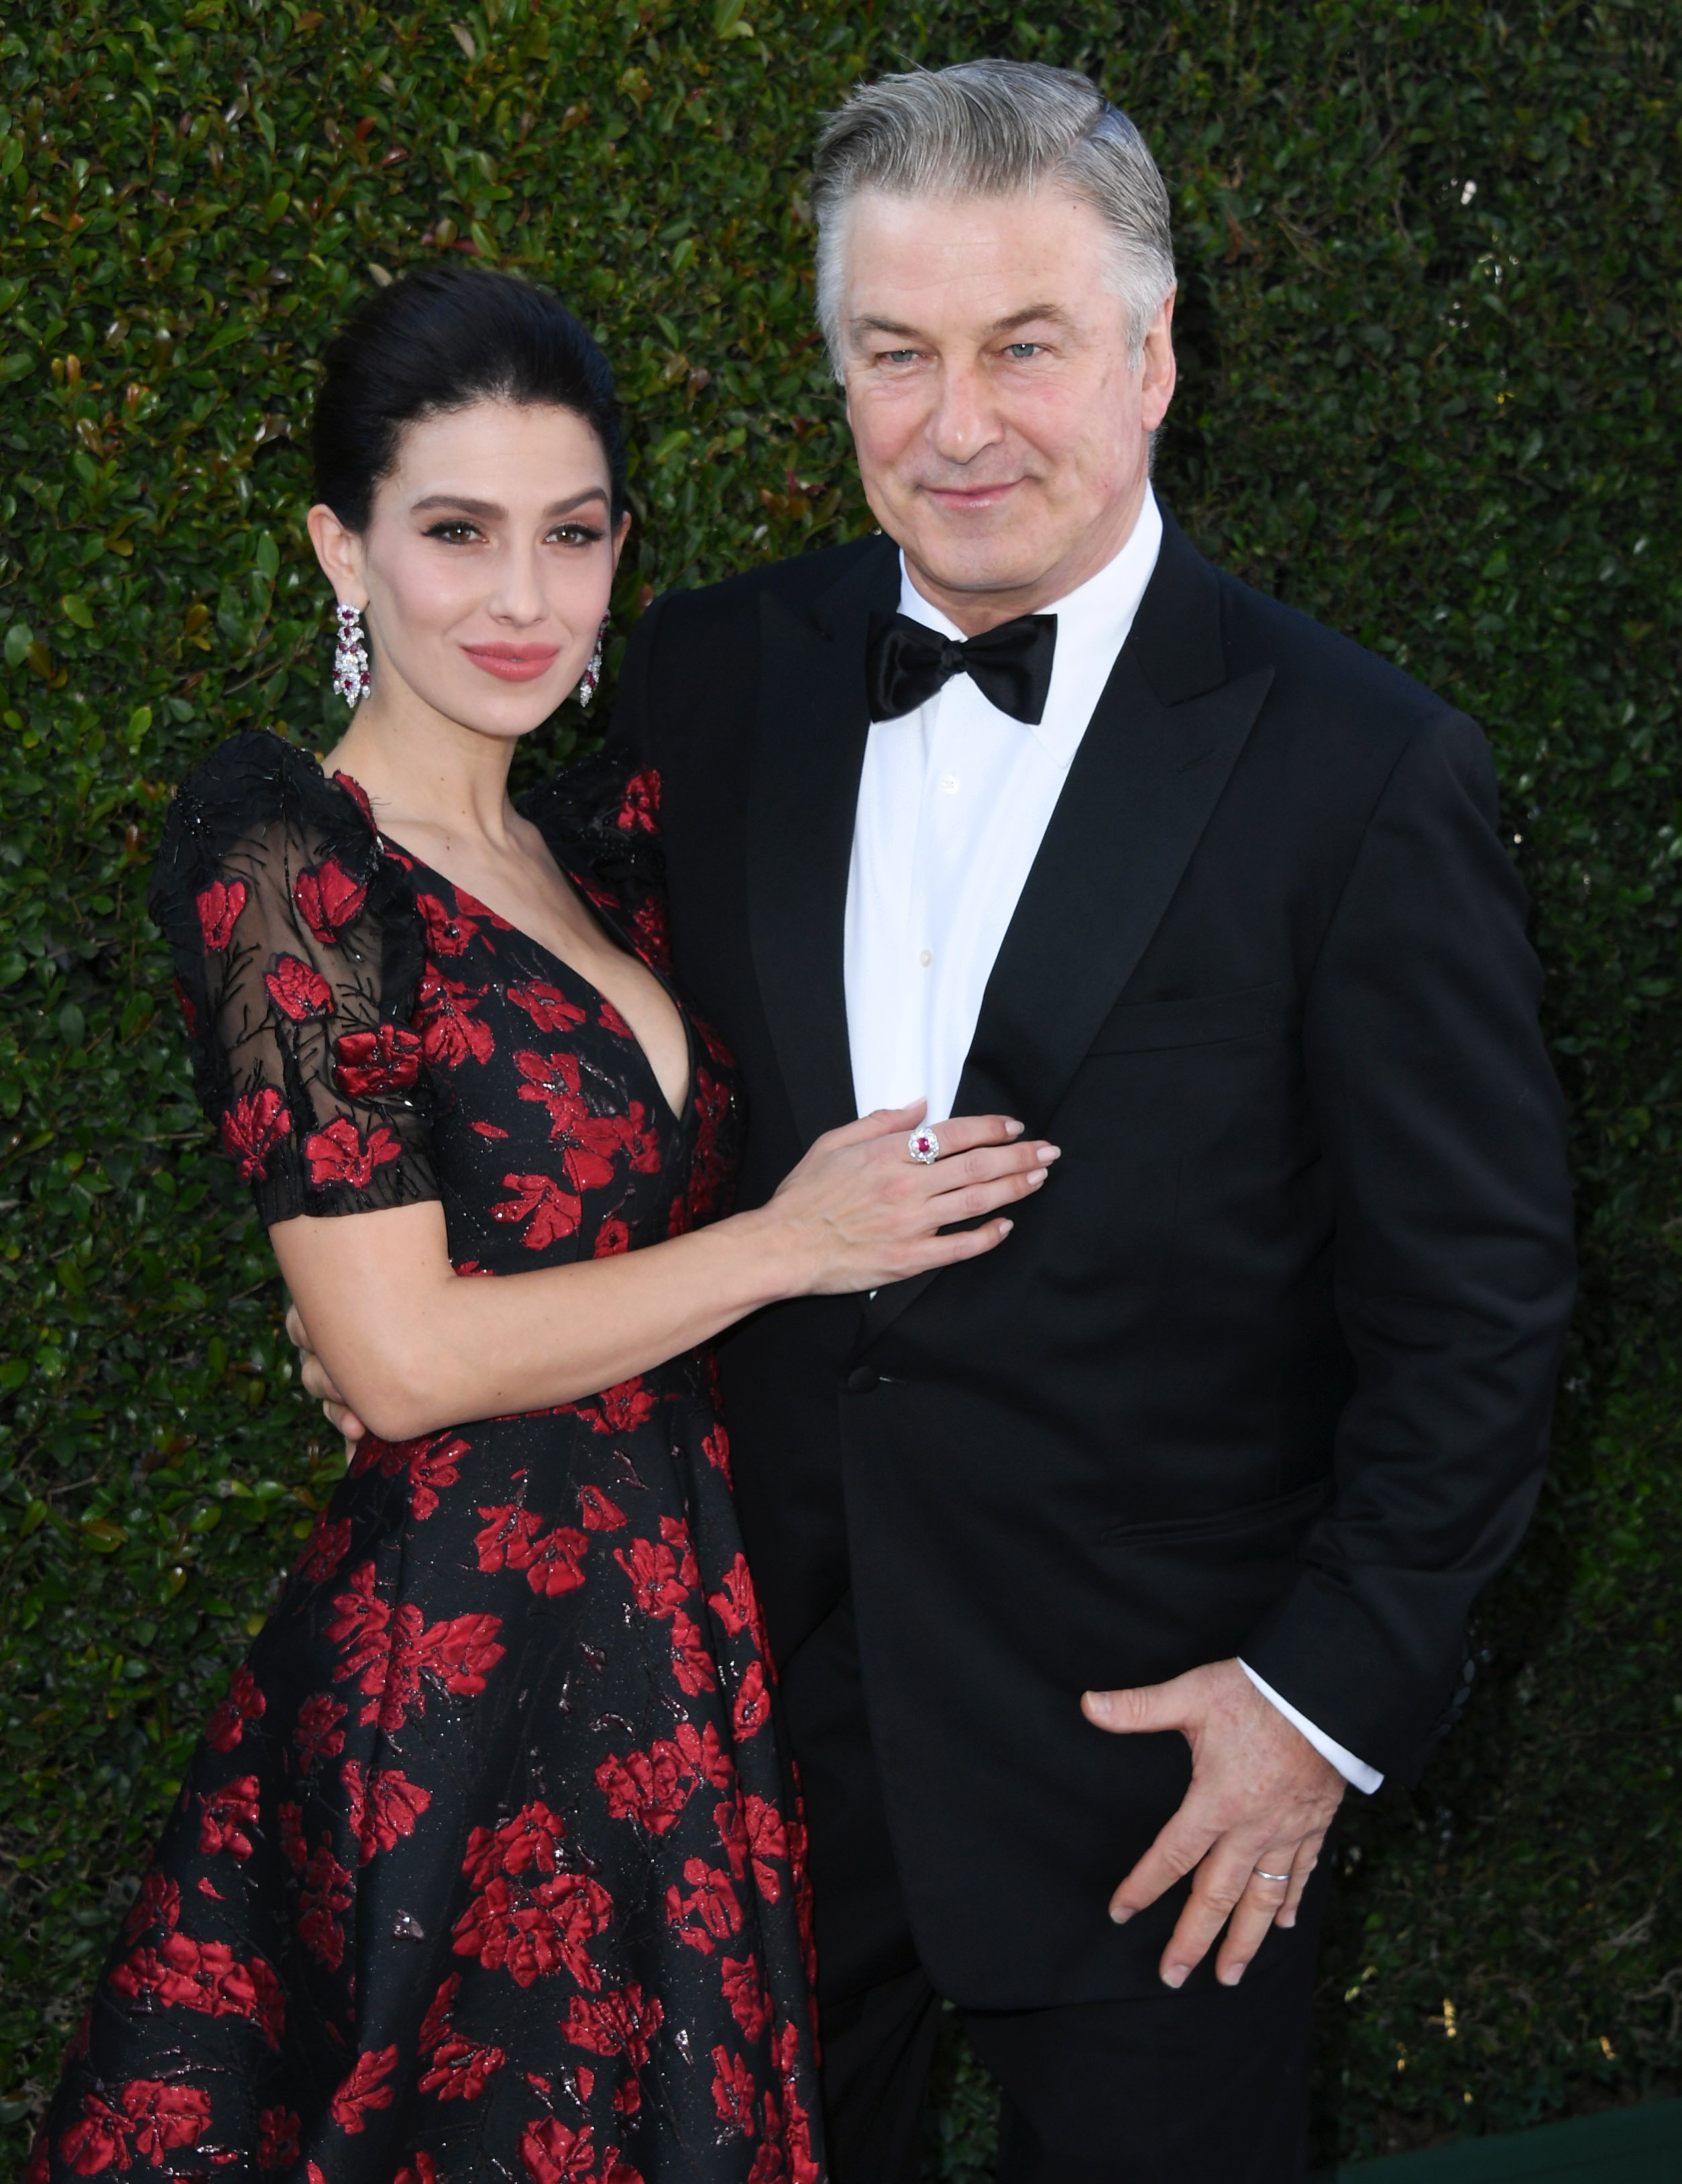 Alec and Hilaria Baldwin pictured at the 25th Annual Screen Actors Guild Awards, 2019, California. | Photo: Getty Images 